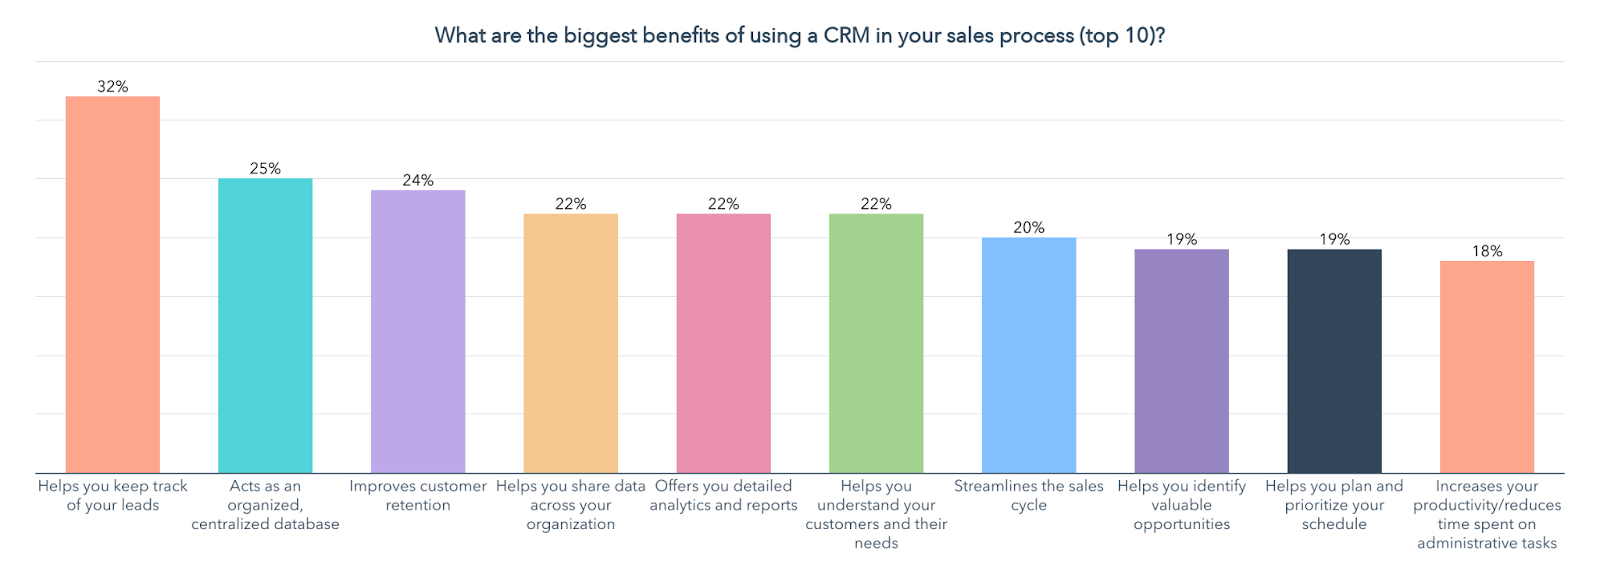 biggest benefits of using a CRM